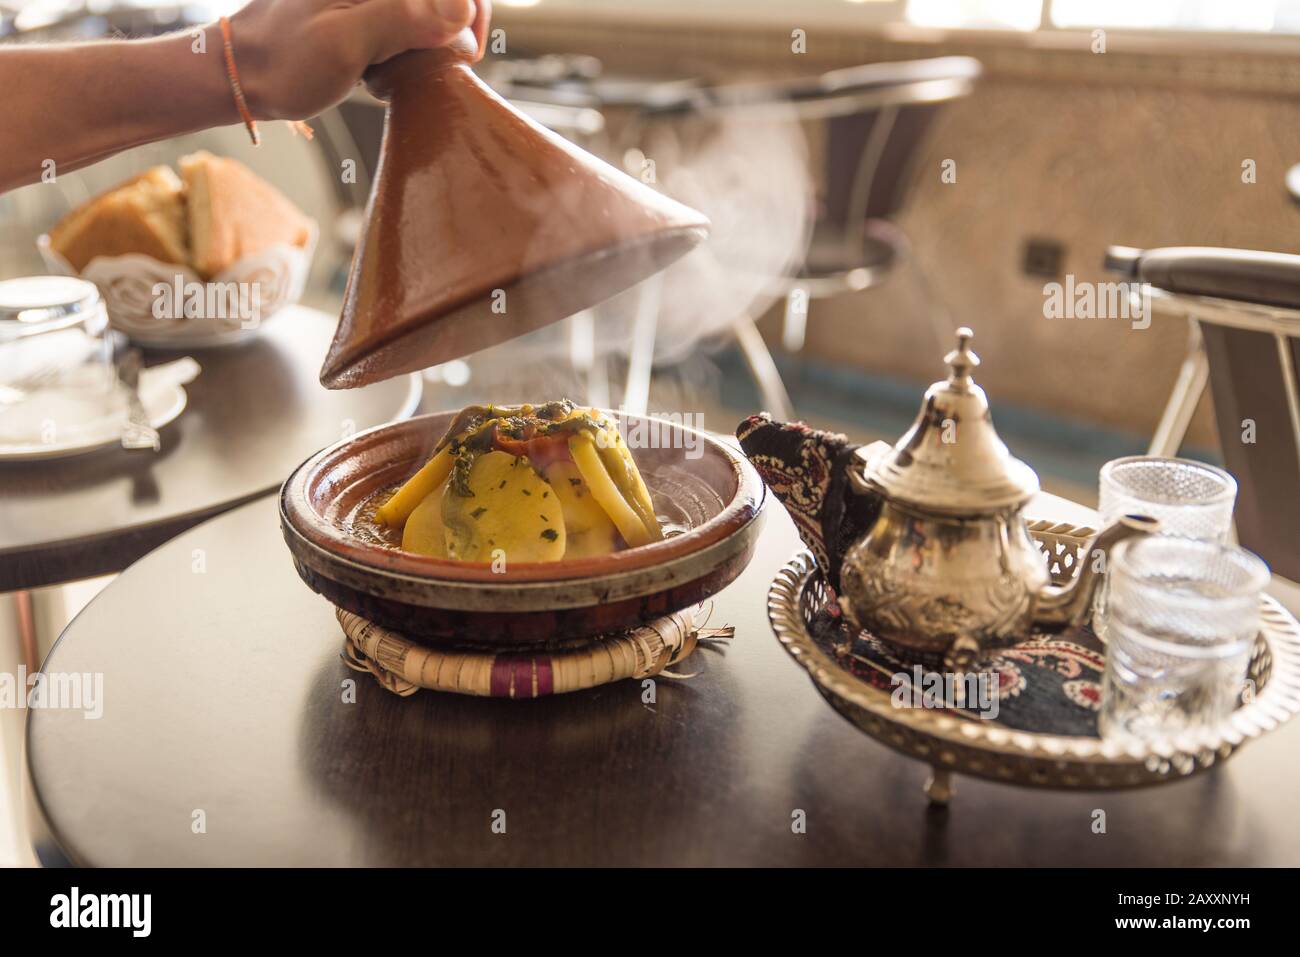 Lifting the Lid off a Tagine in a Moroccan Restaurant With Traditional Teapot and Table Setting Stock Photo